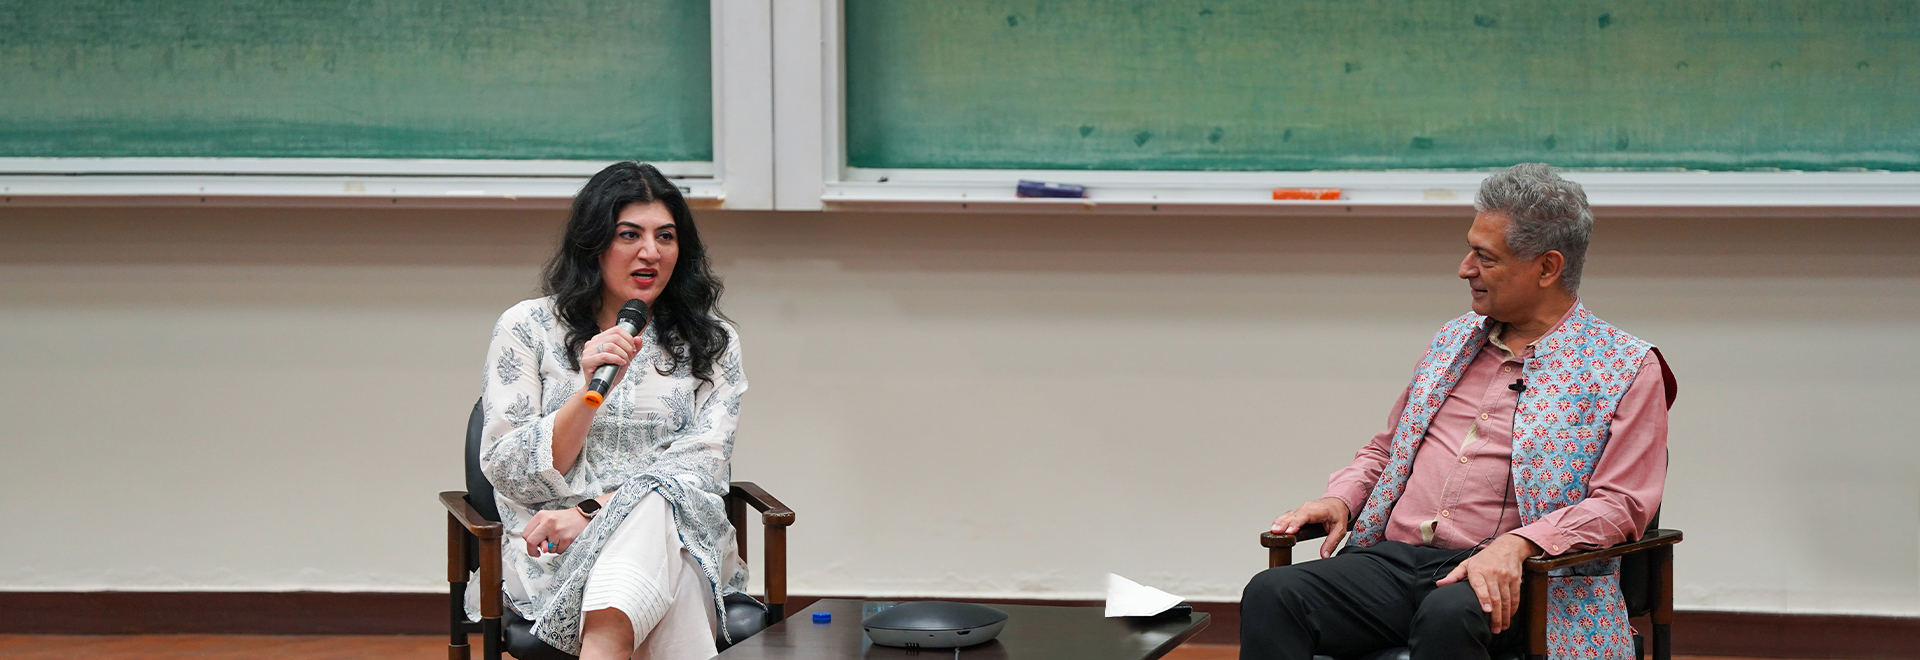 Alumna and Microsoft Executive, Fatima Kardar Engages with LUMS Community